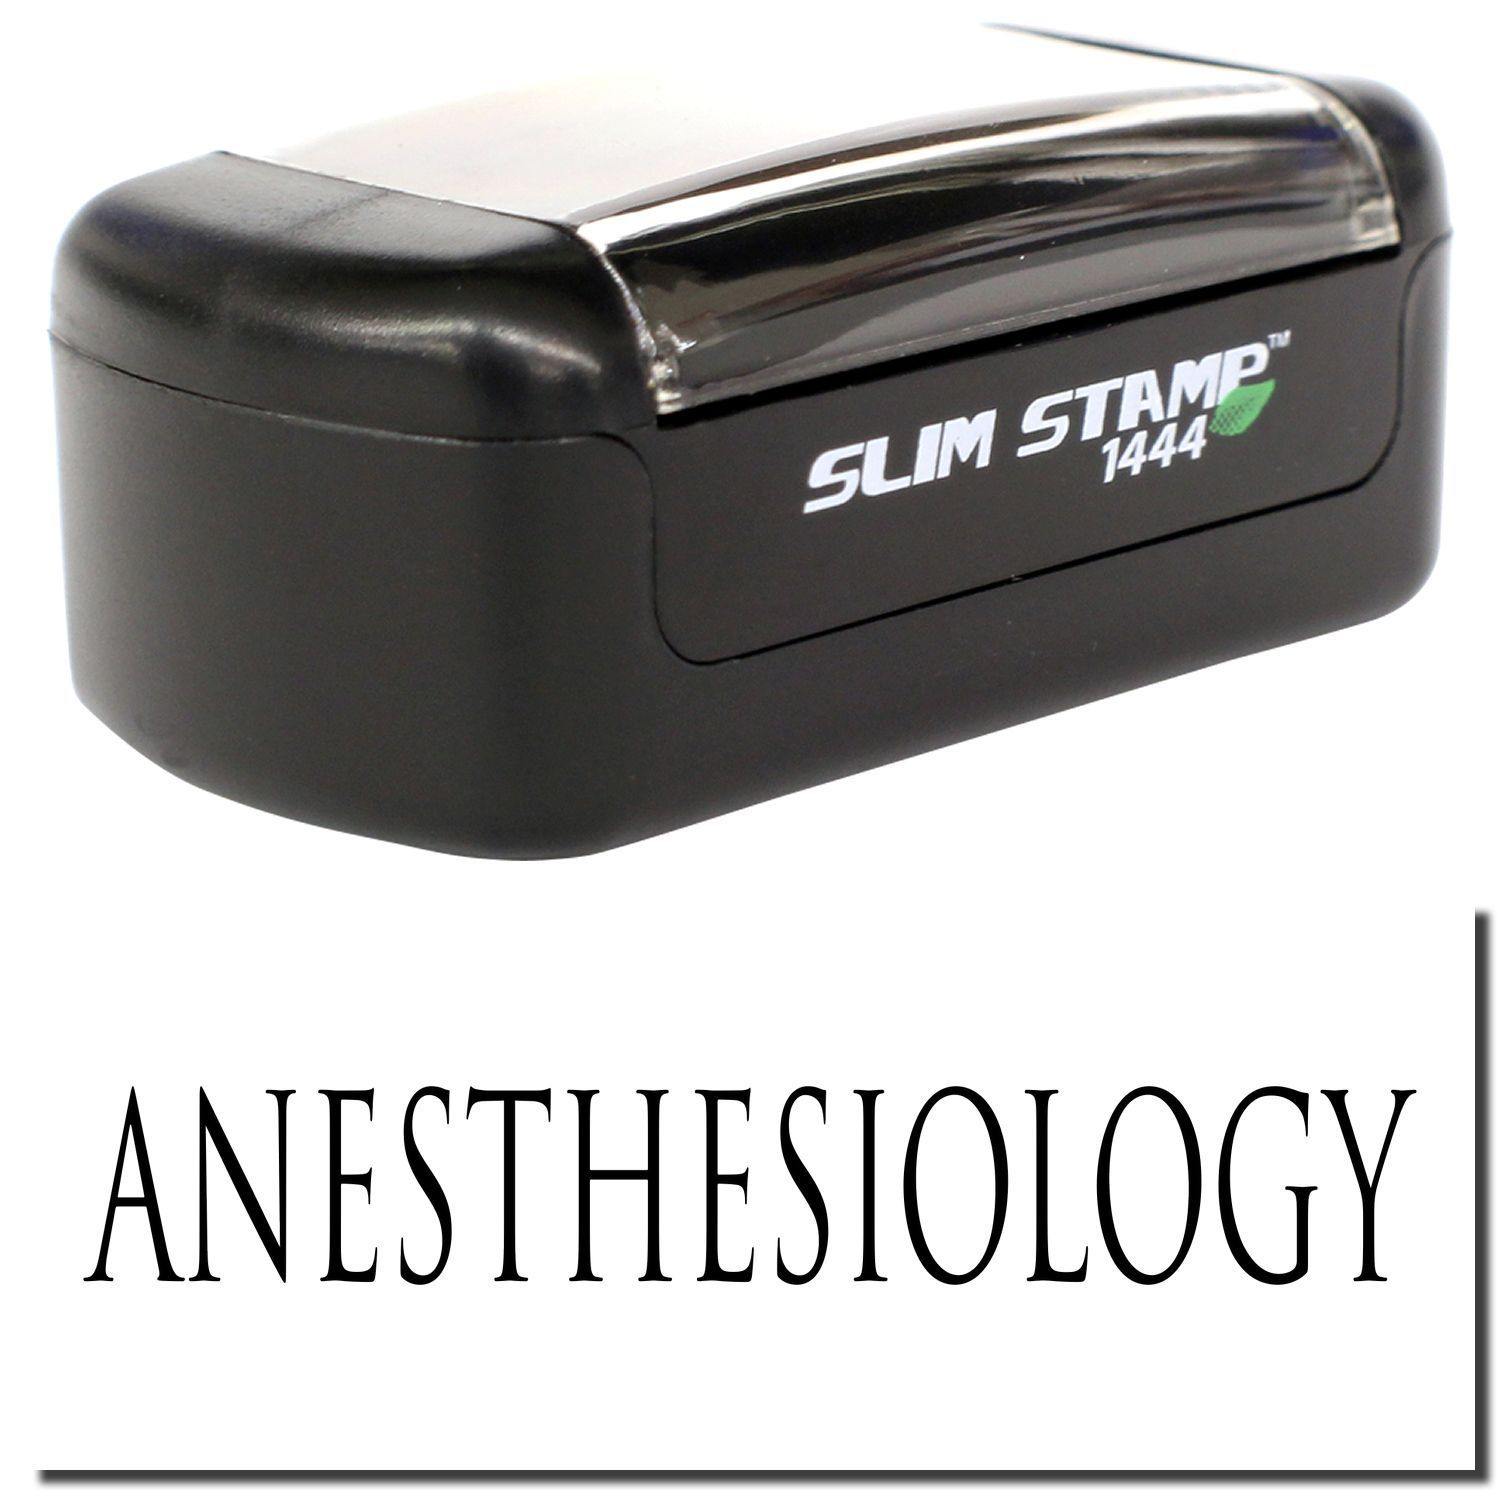 A stock office pre-inked stamp with a stamped image showing how the text "ANESTHESIOLOGY" is displayed after stamping.